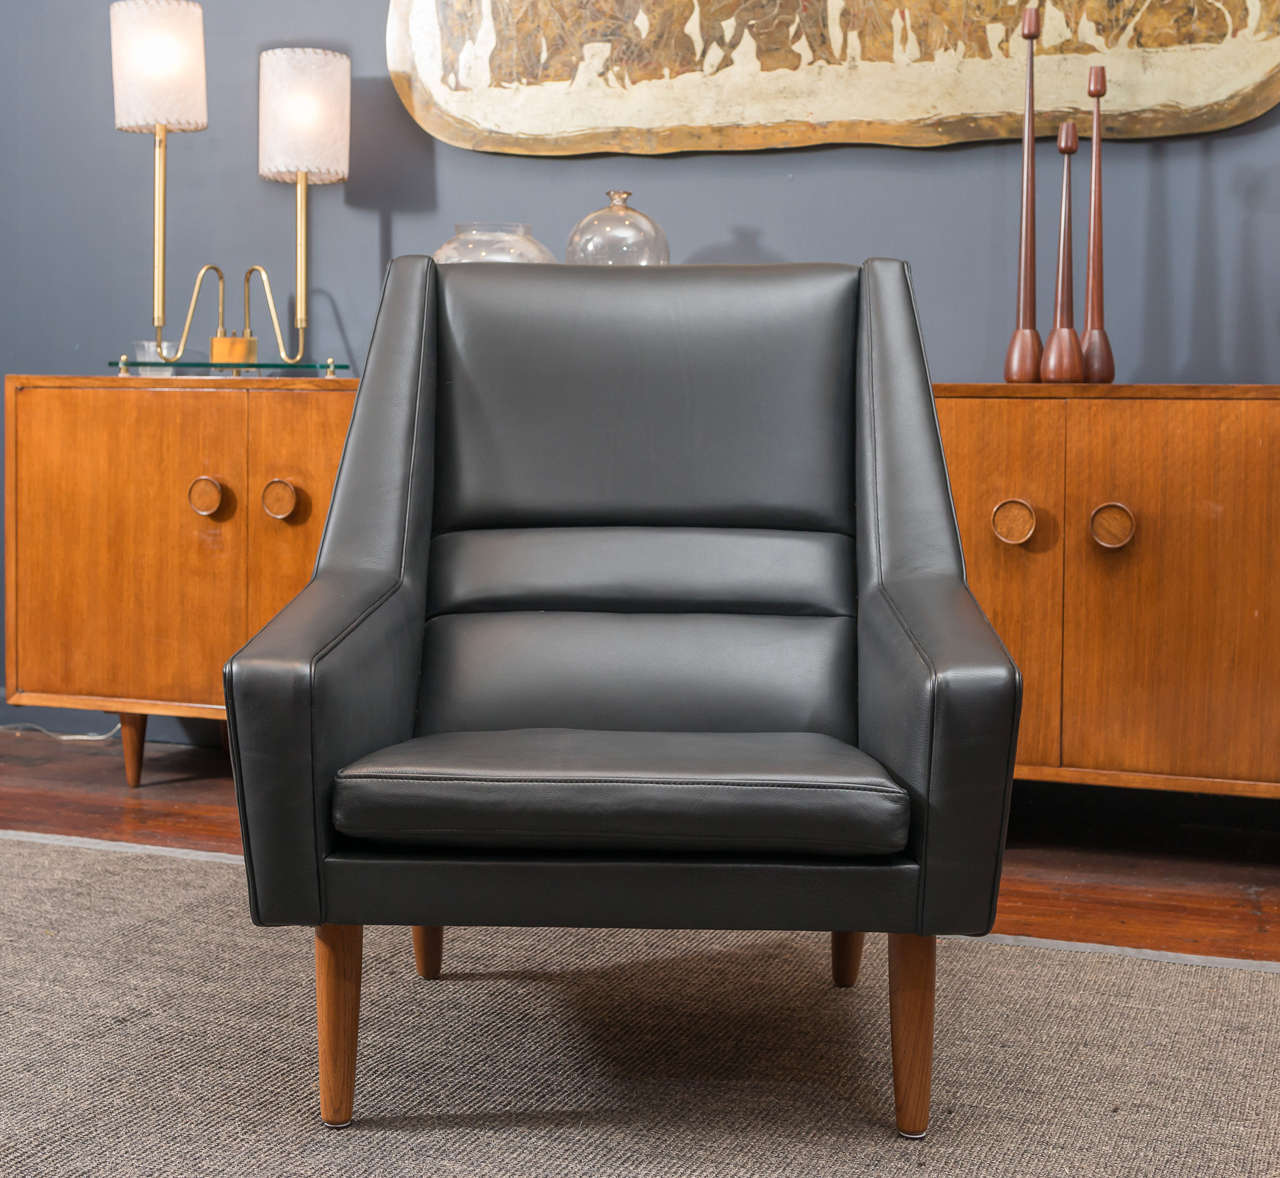 Supreme man's chair newly upholstered in black leather with refinished teak legs.